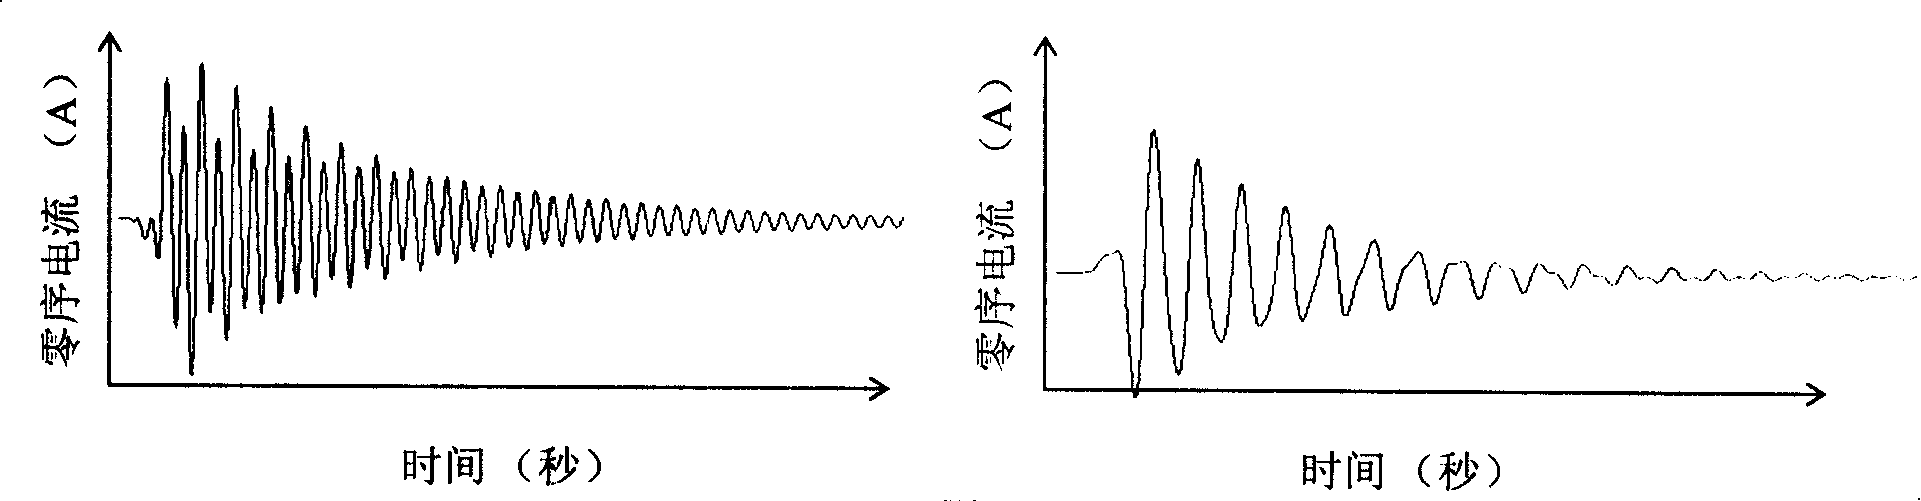 Method for faulty orientation and subsection of power system low current grounding